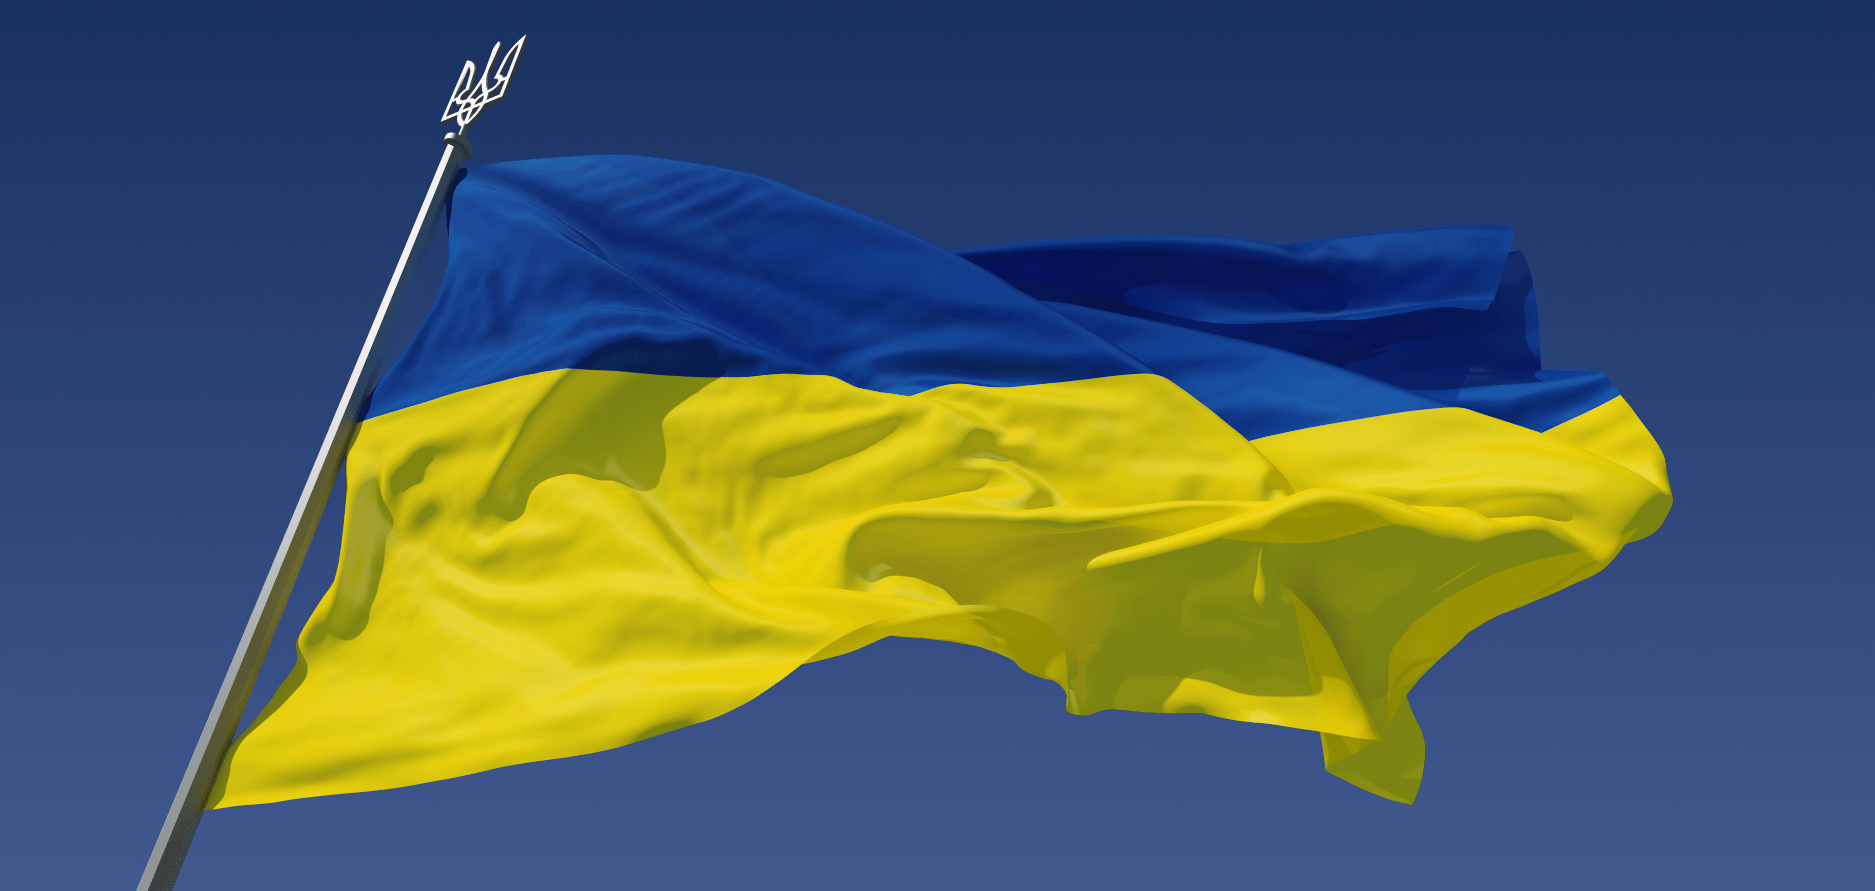 Bitcoin is Better Off Without Being Legalized in Ukraine